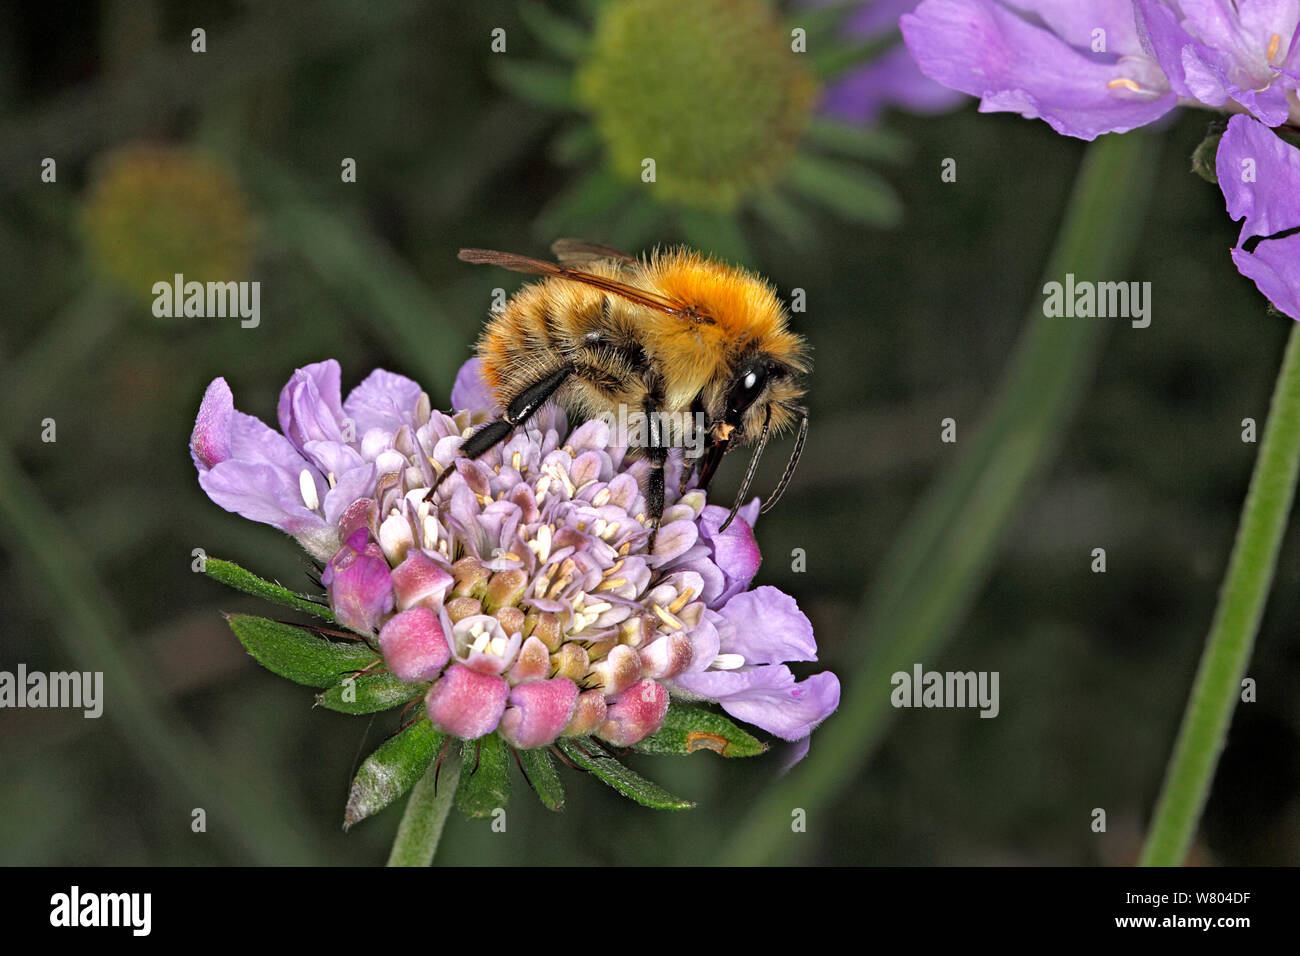 Common carder bumblebee (Bombus pascuorum) queen feeding on Scabious (Scabiosa) flower in garden Cheshire, England, UK. September. Stock Photo